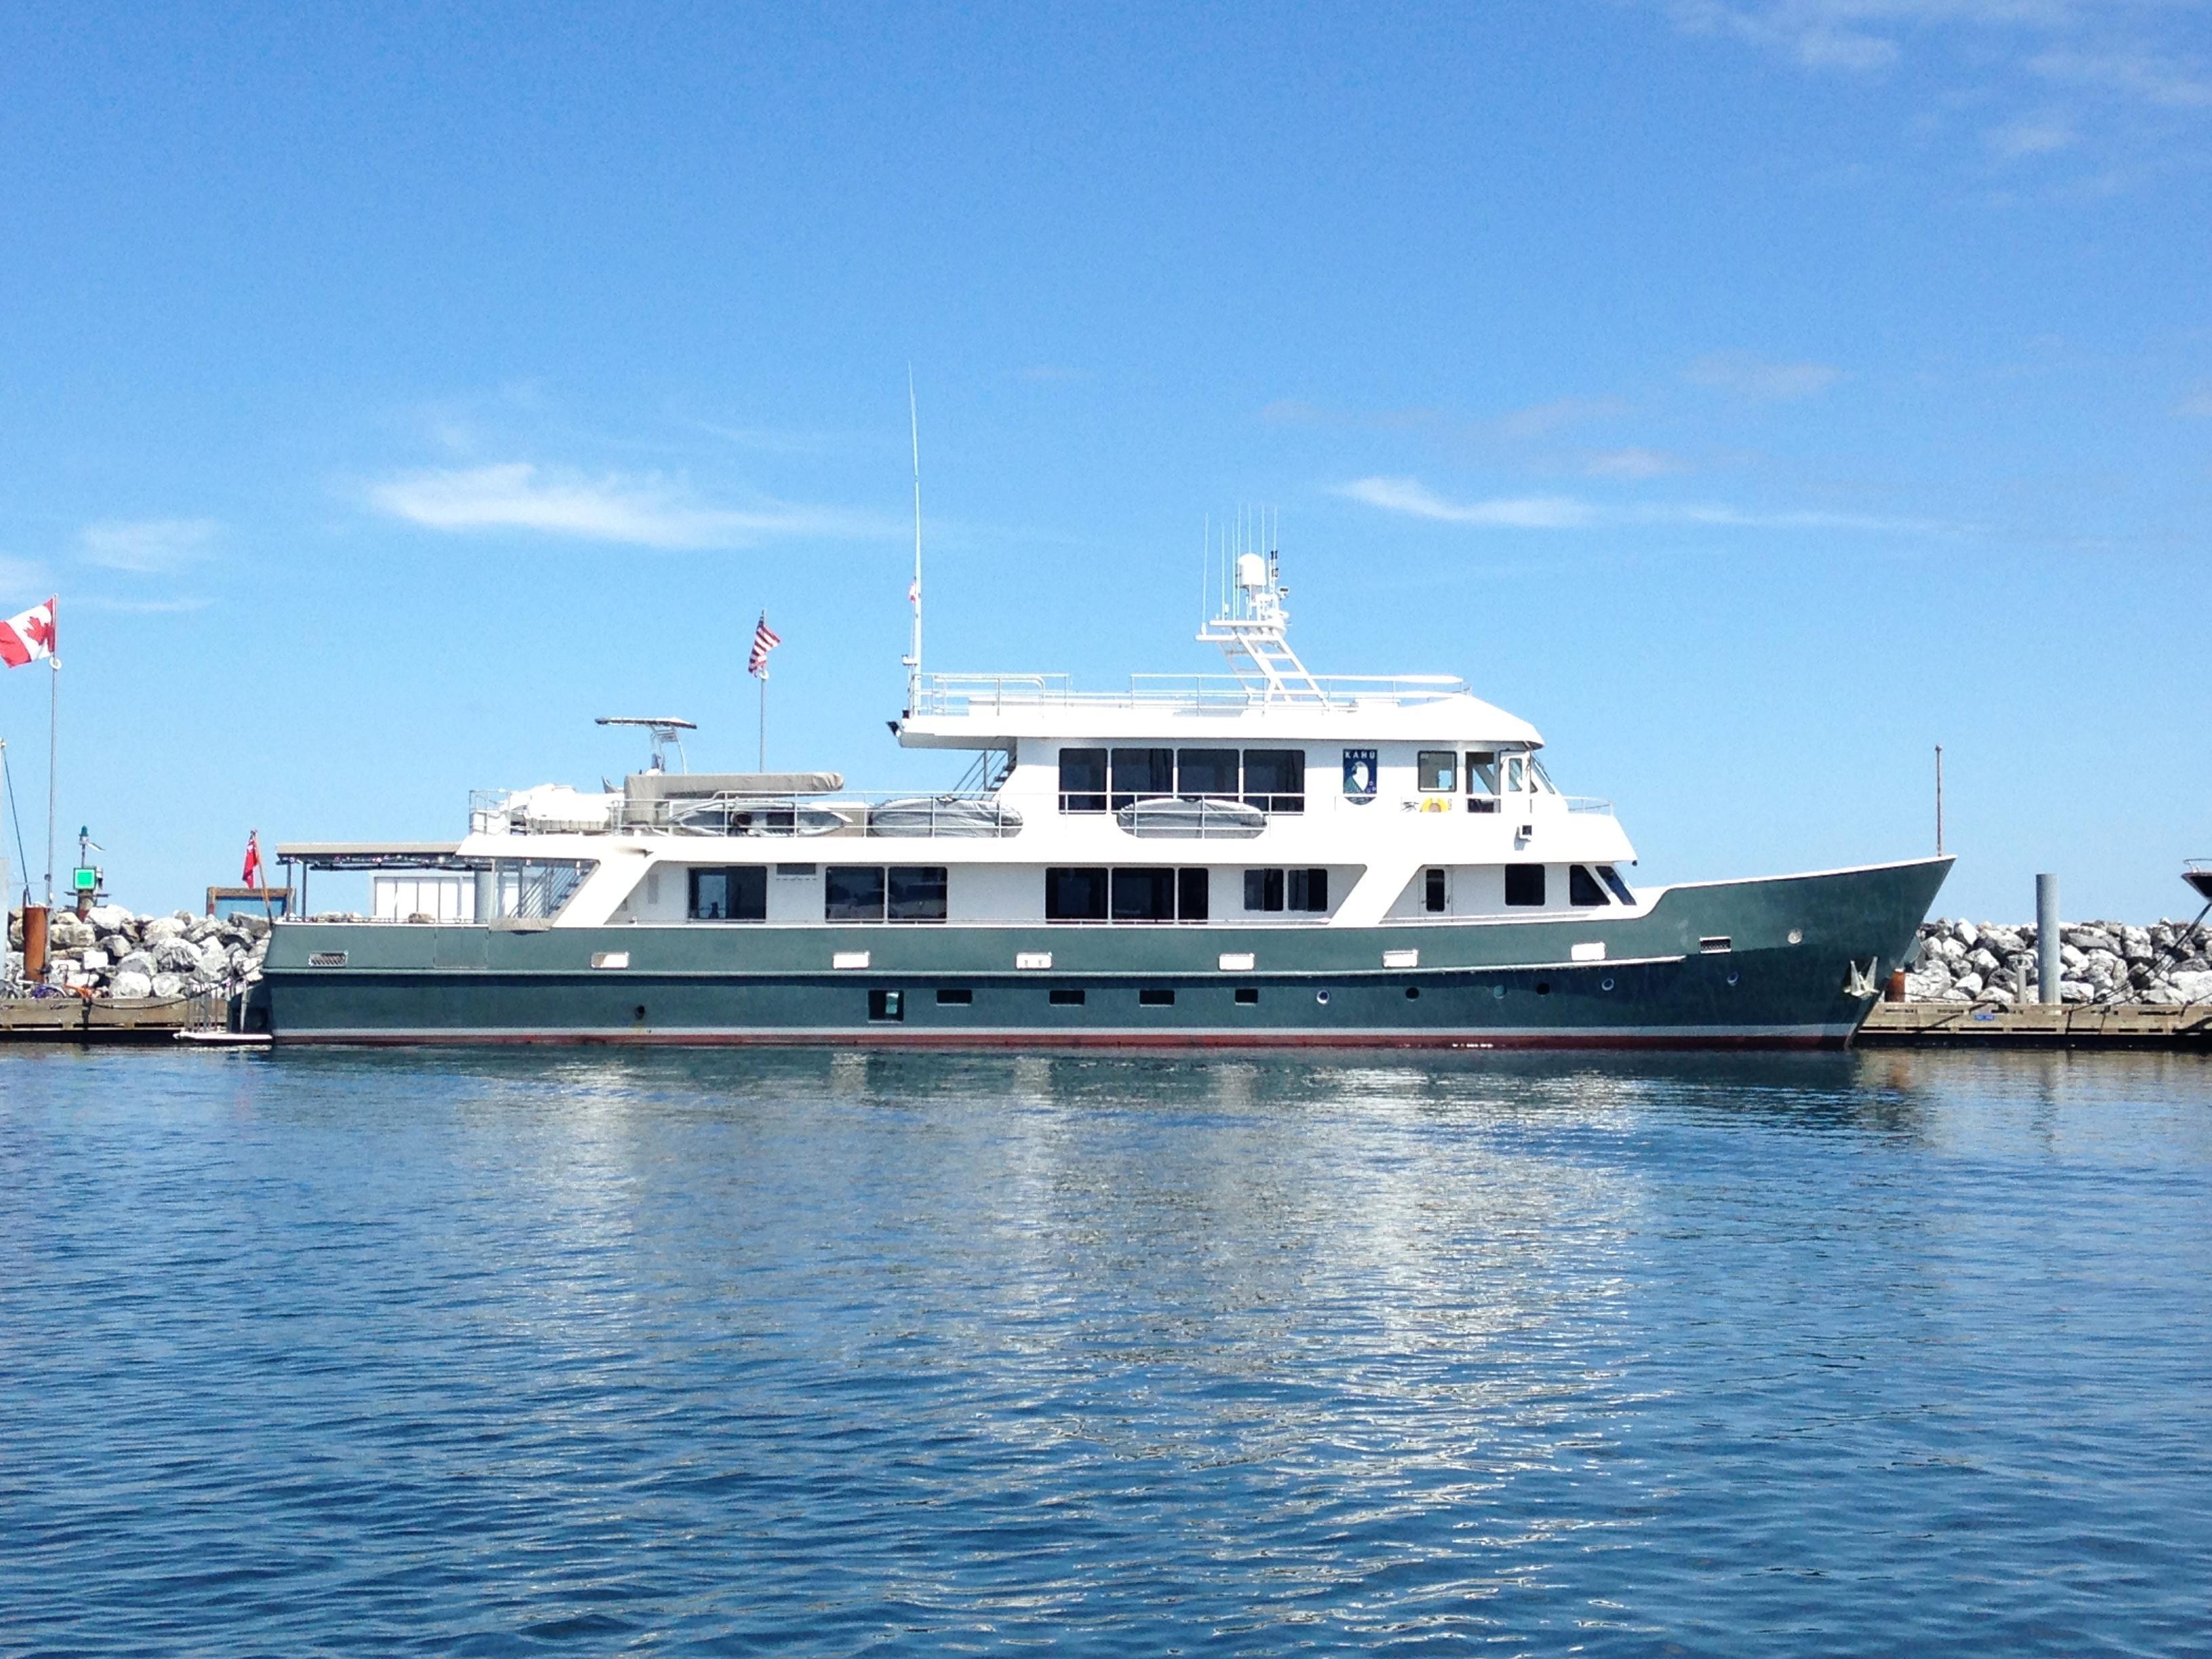 Whangarei/Fitzroy Expedition Vessel,